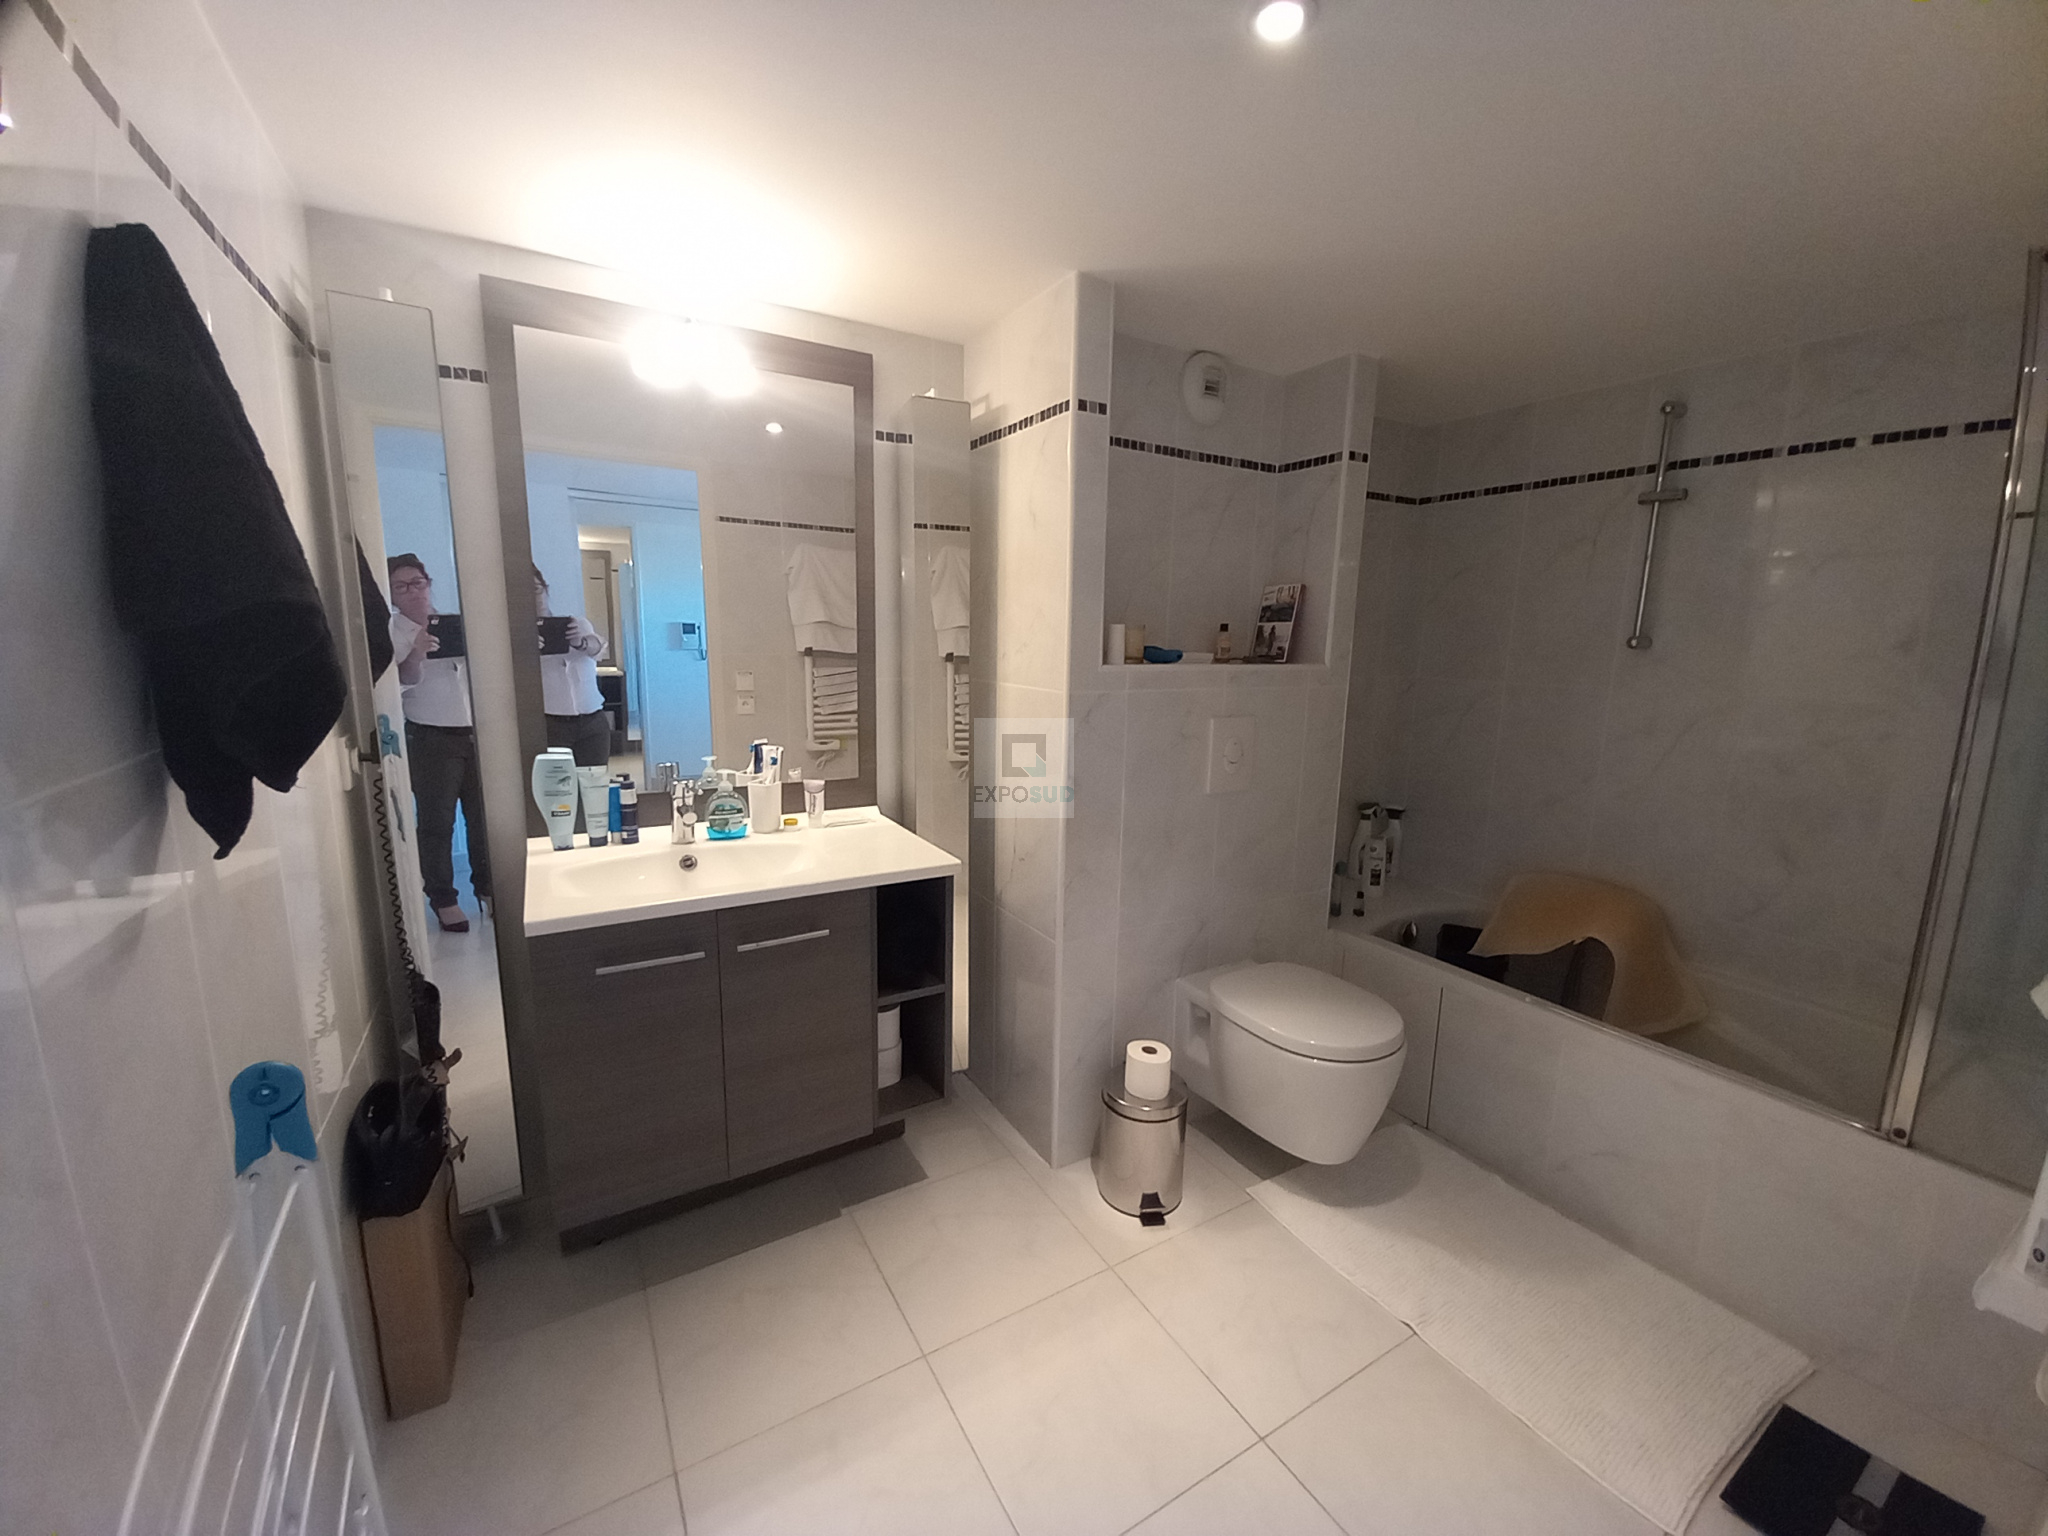 Vente Appartement ANTIBES individuel chauffage